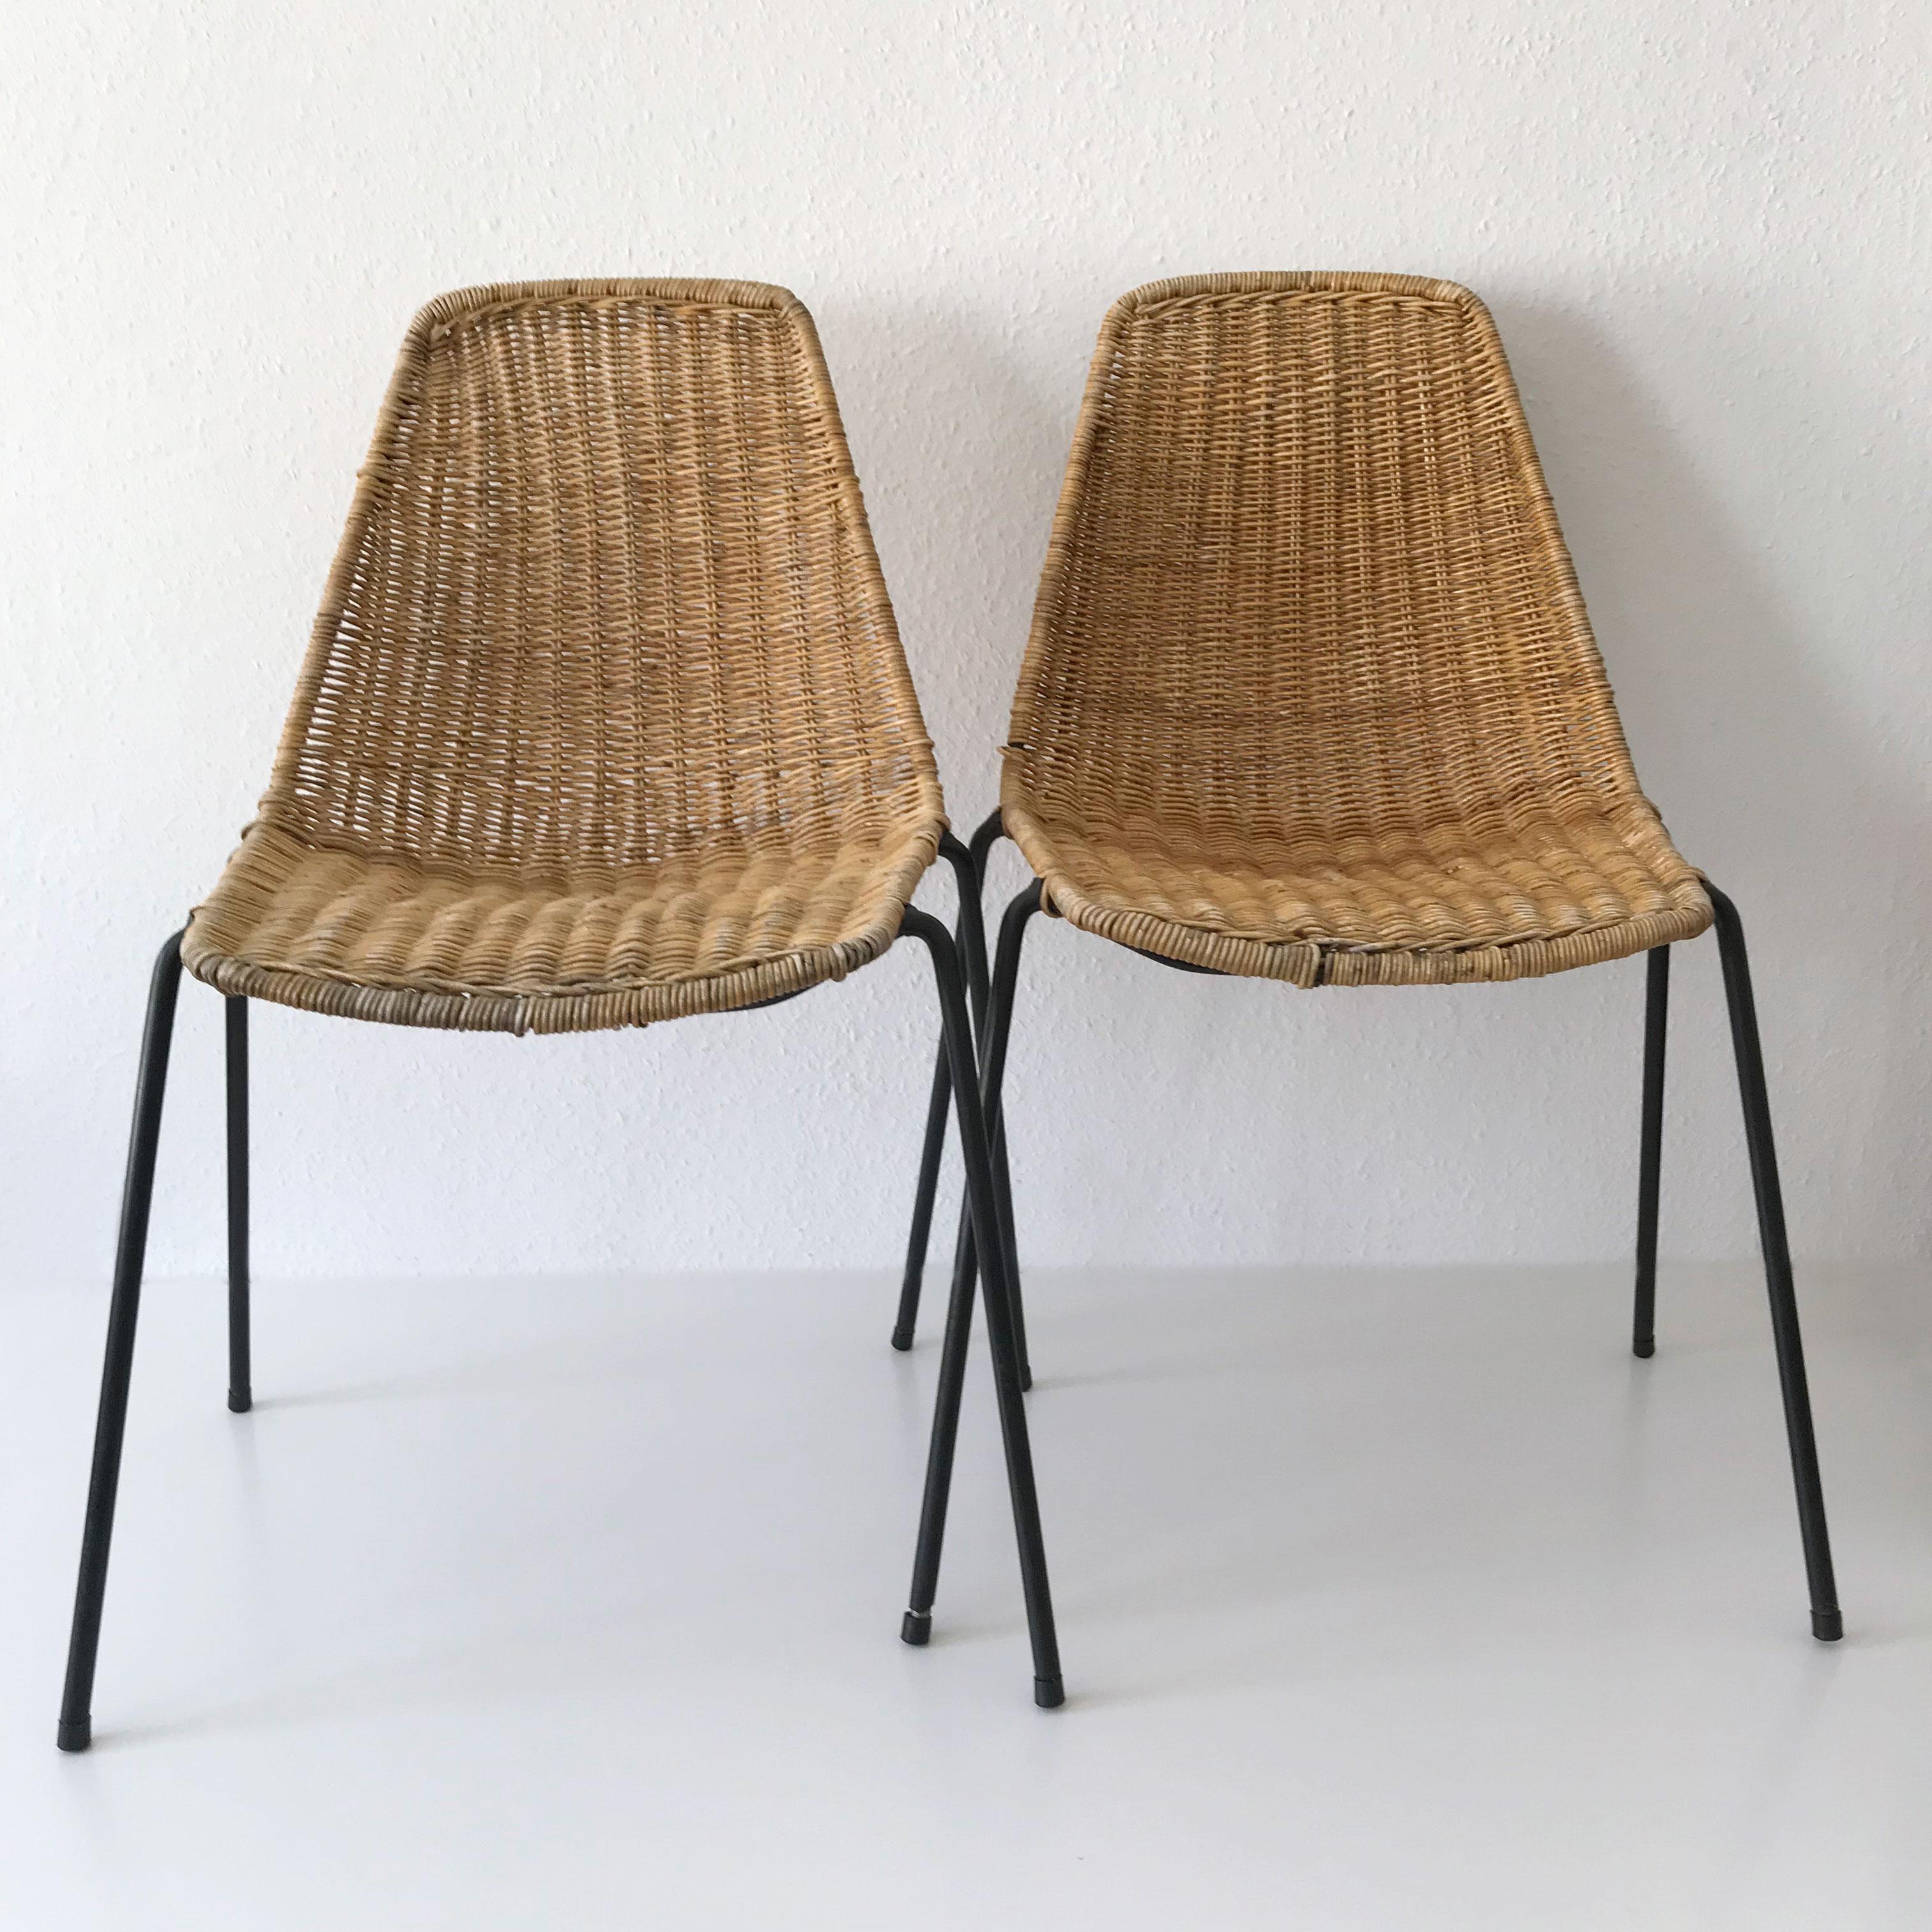 Steel Set of Two Basket Chairs and Stool by Gian Franco Legler, 1951, Switzerland